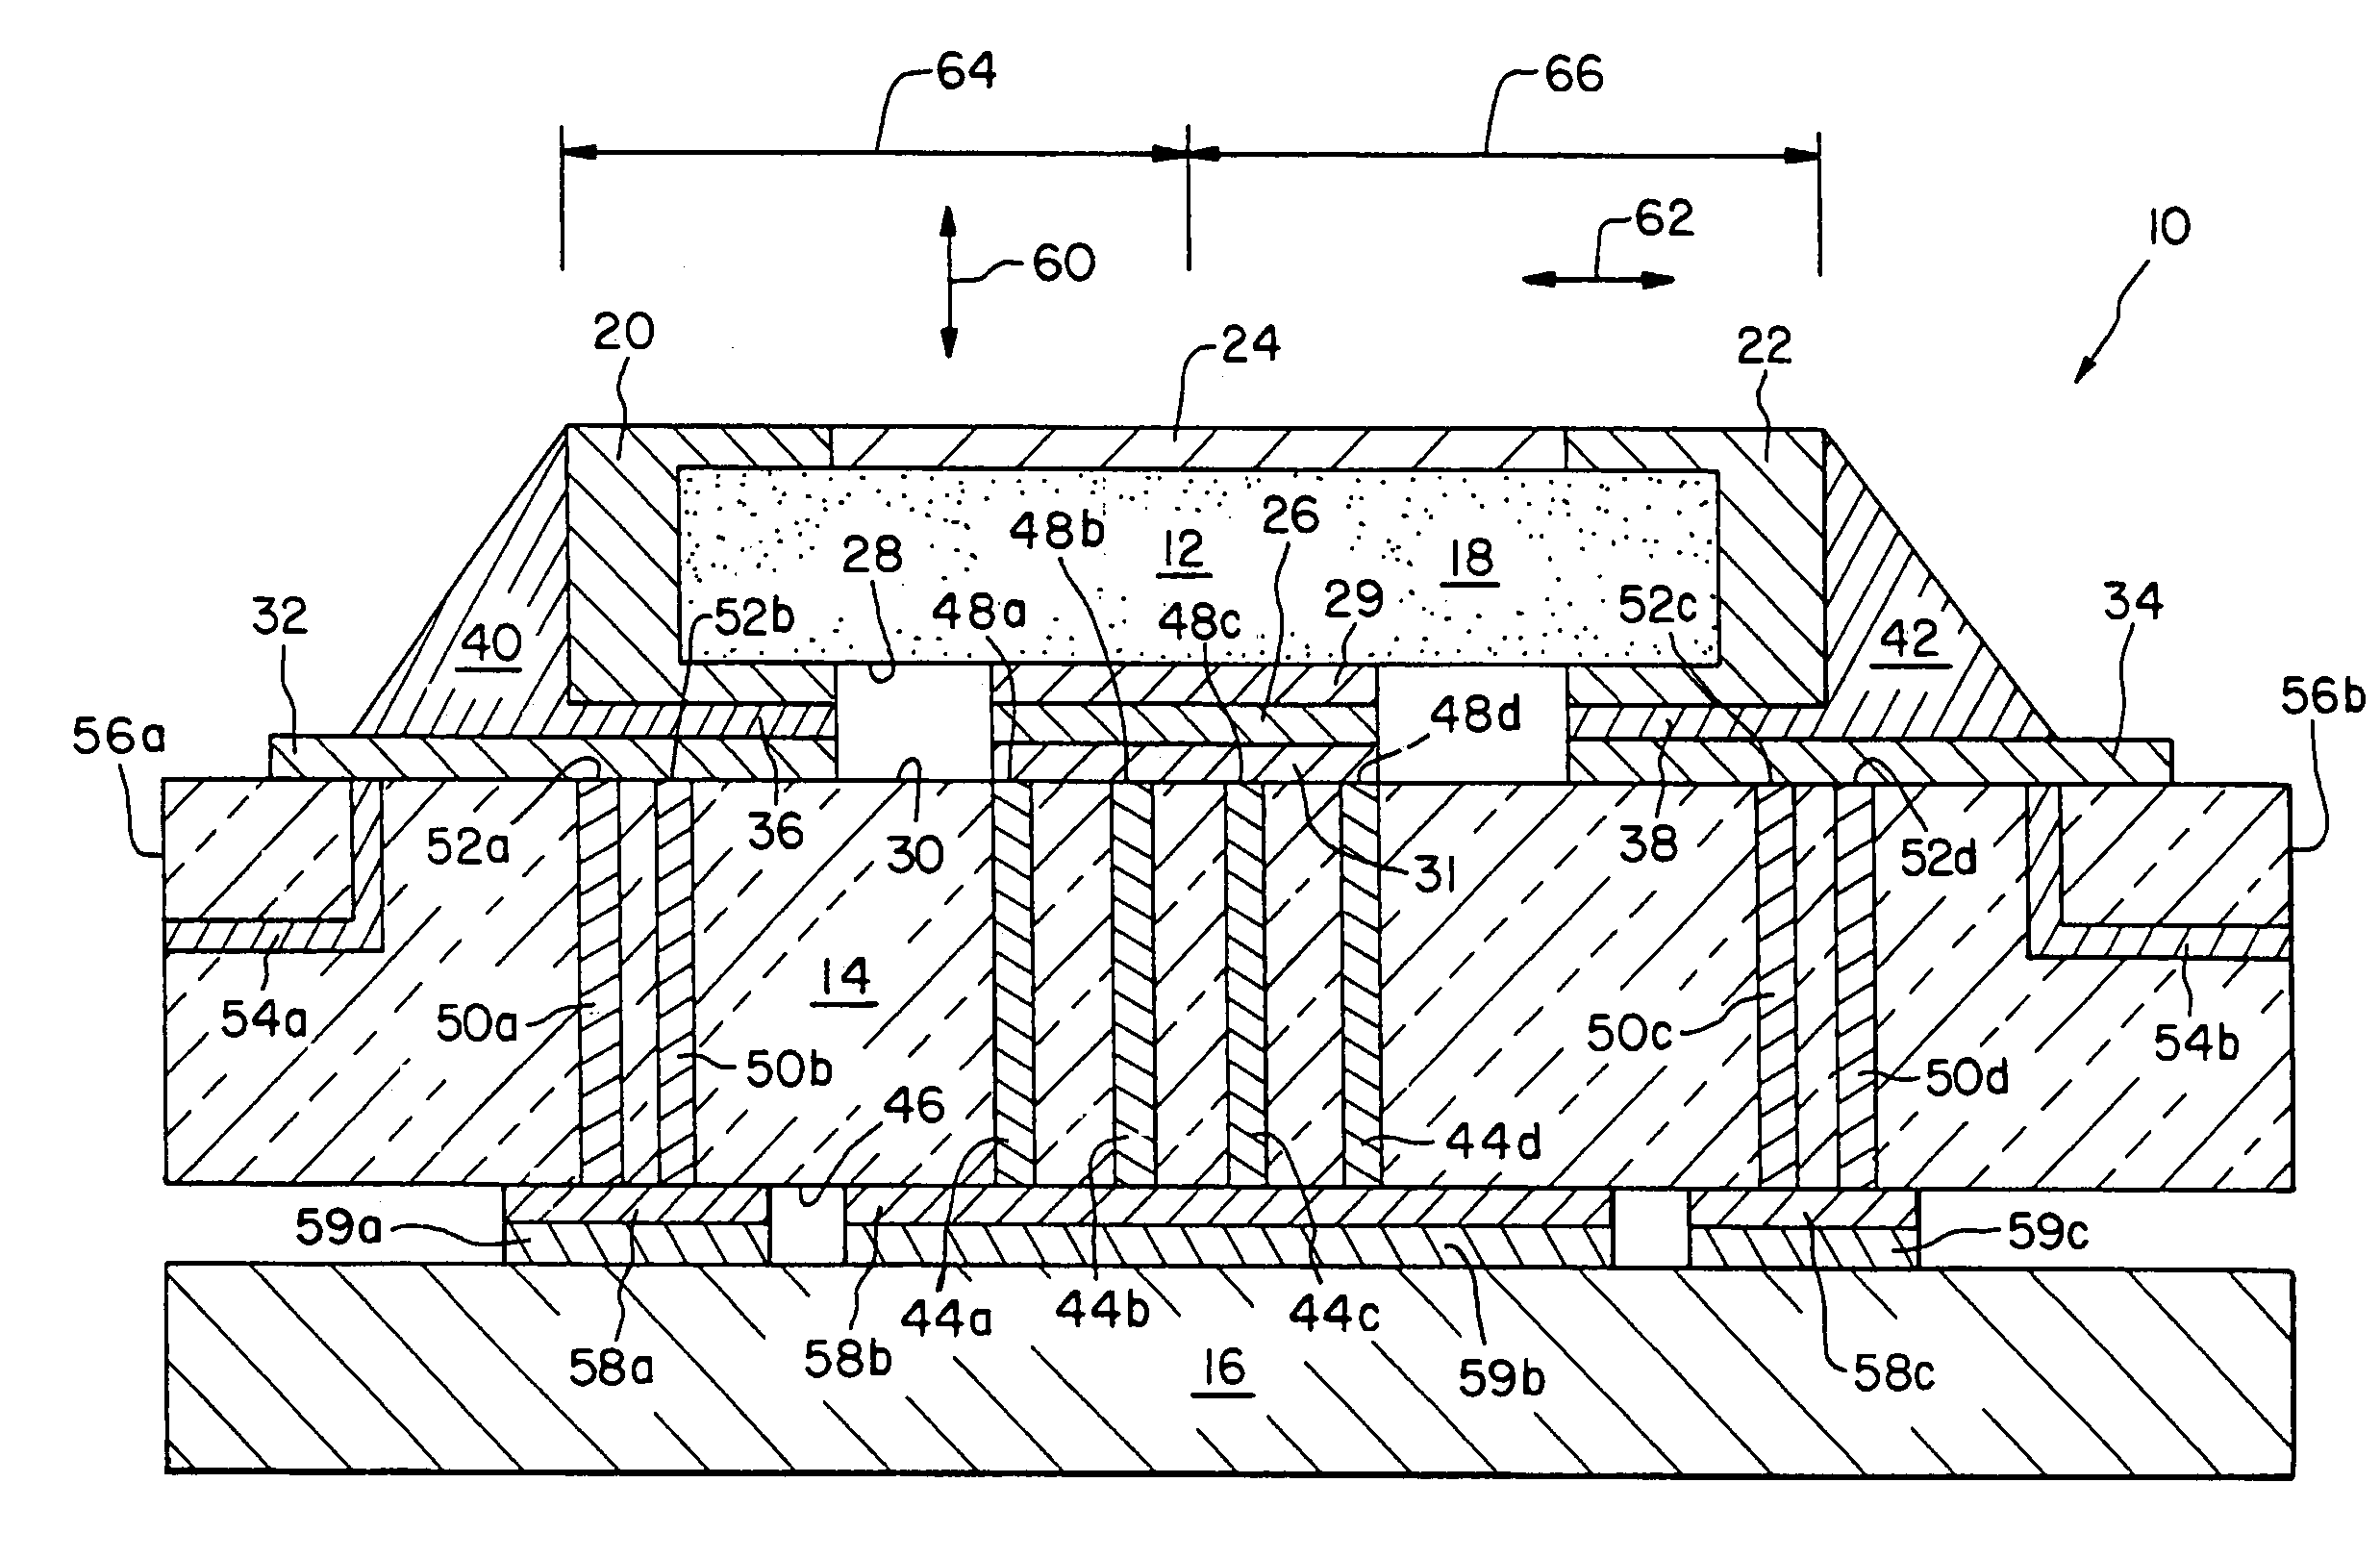 Discrete electronic component arrangement including anchoring, thermally conductive pad